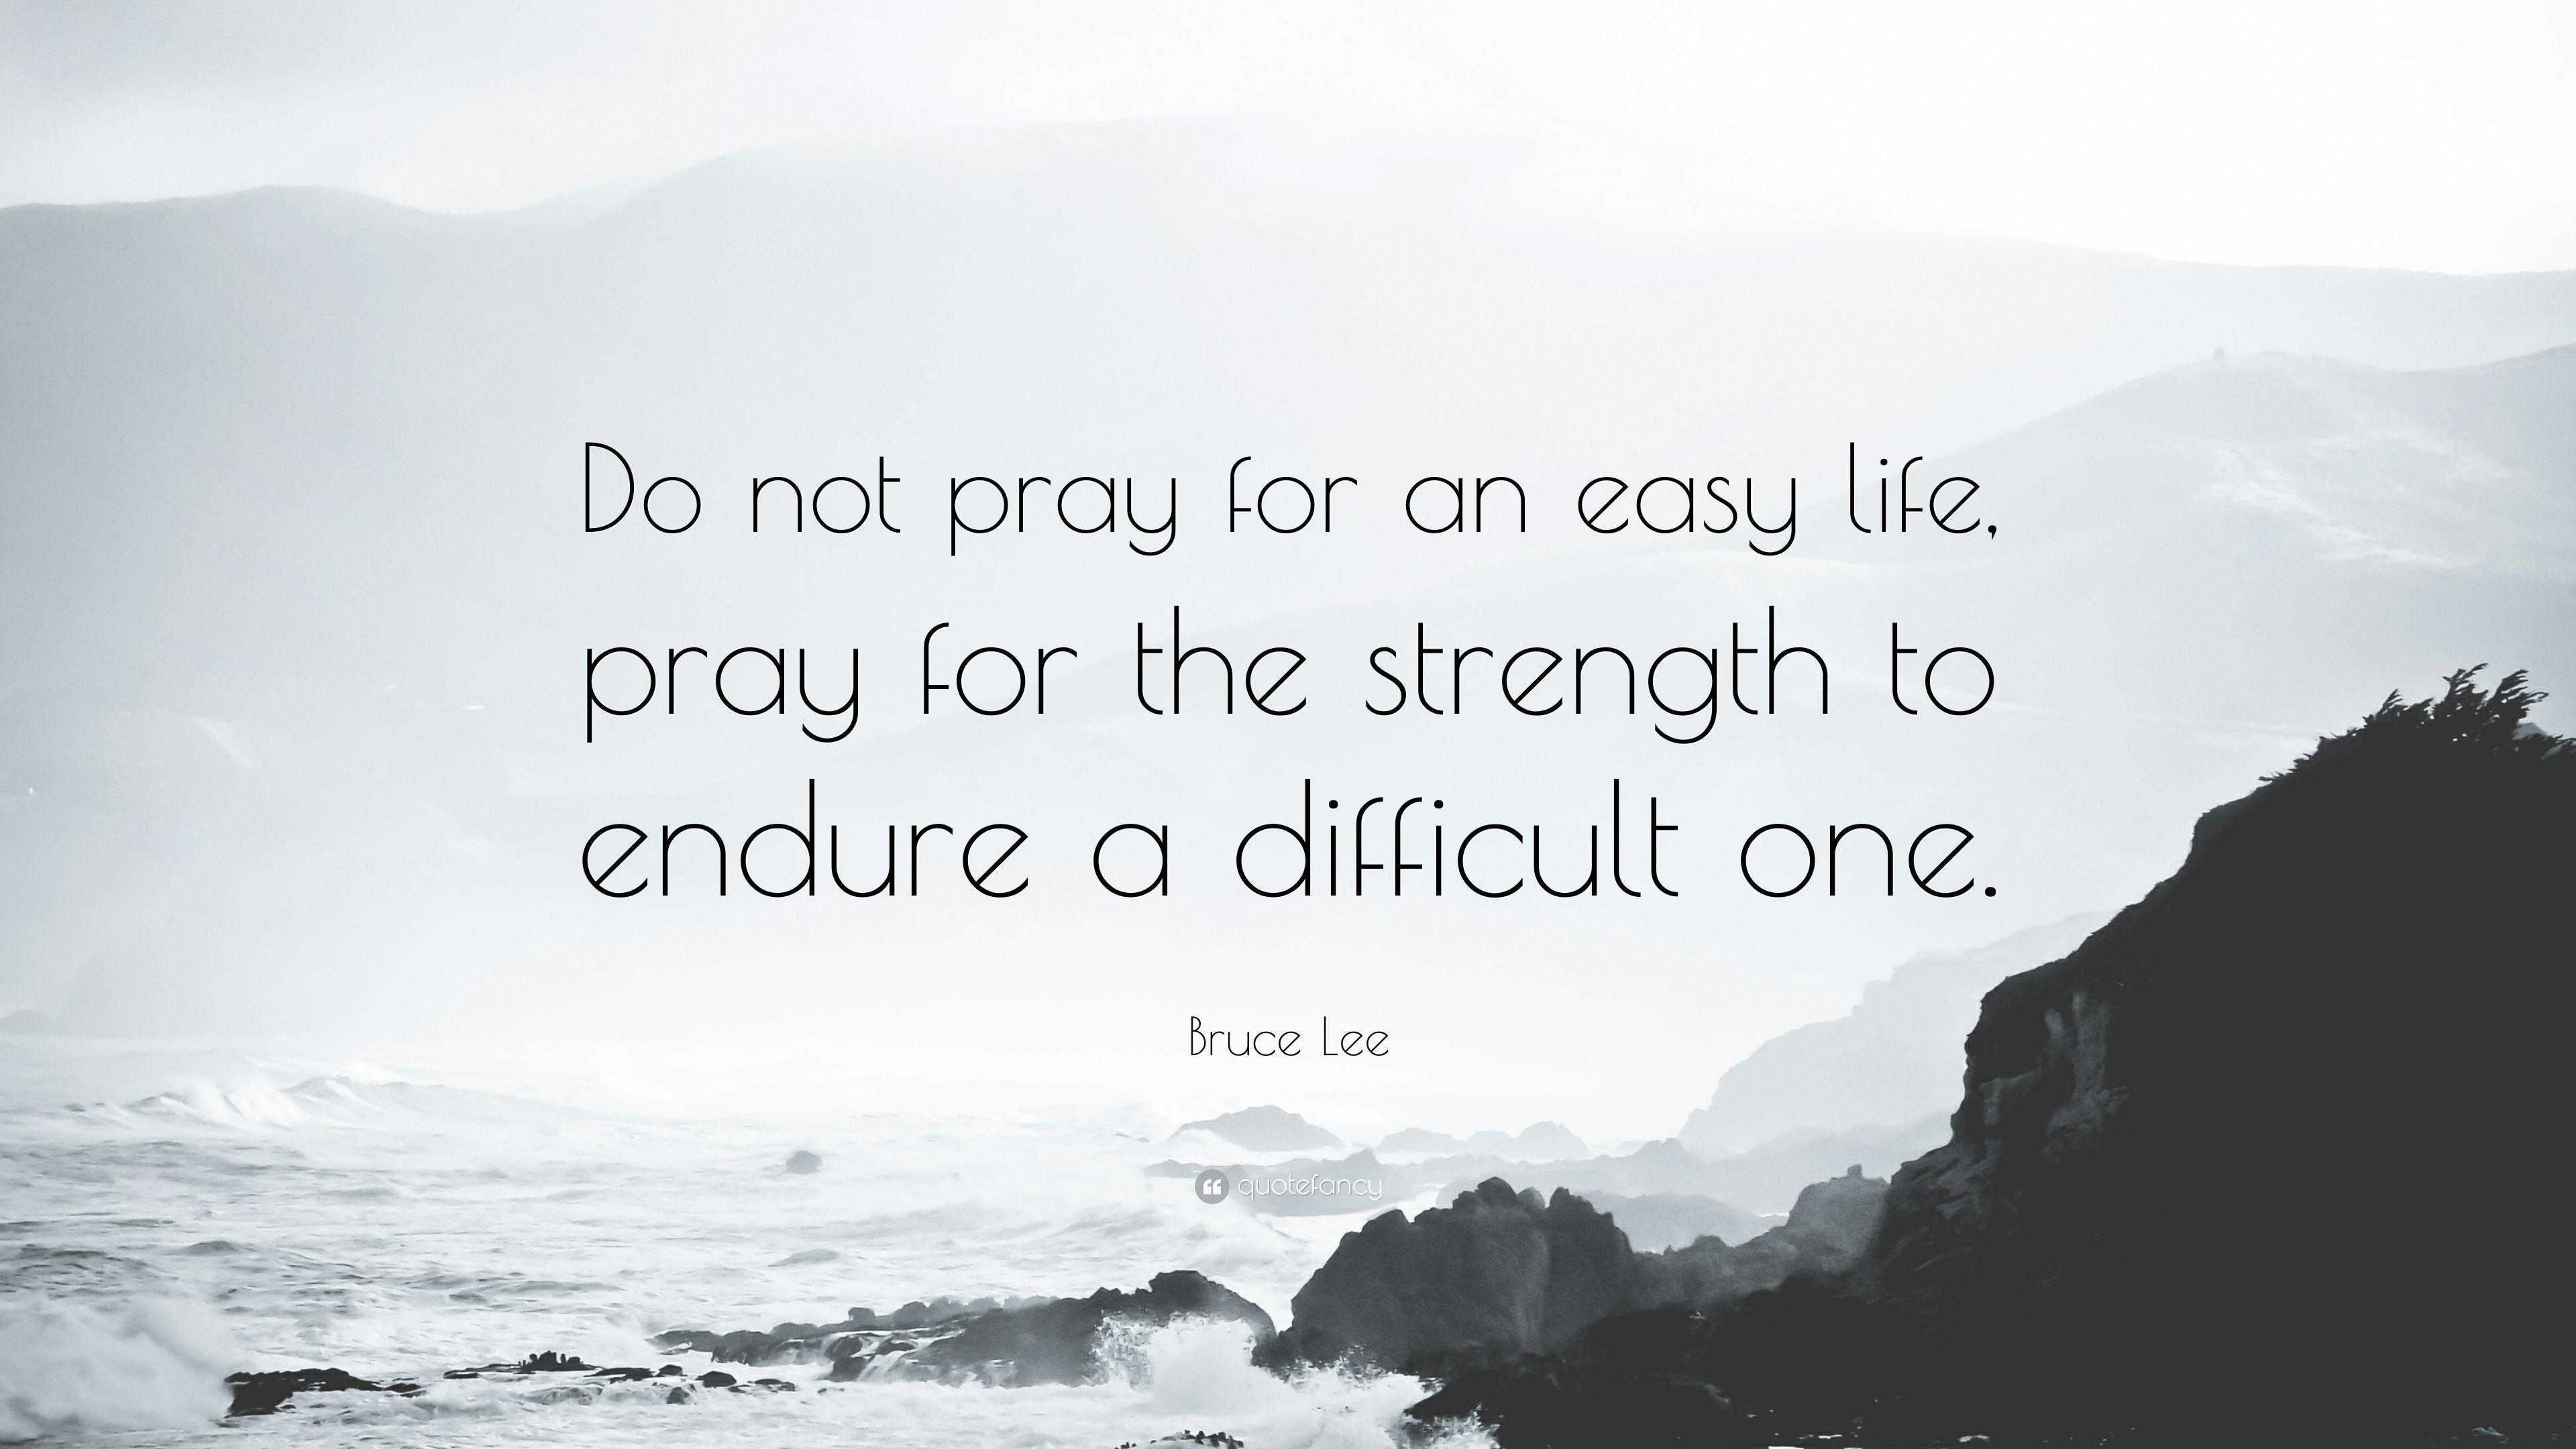 Bruce Lee Quote: “Do not pray for an easy life, pray for